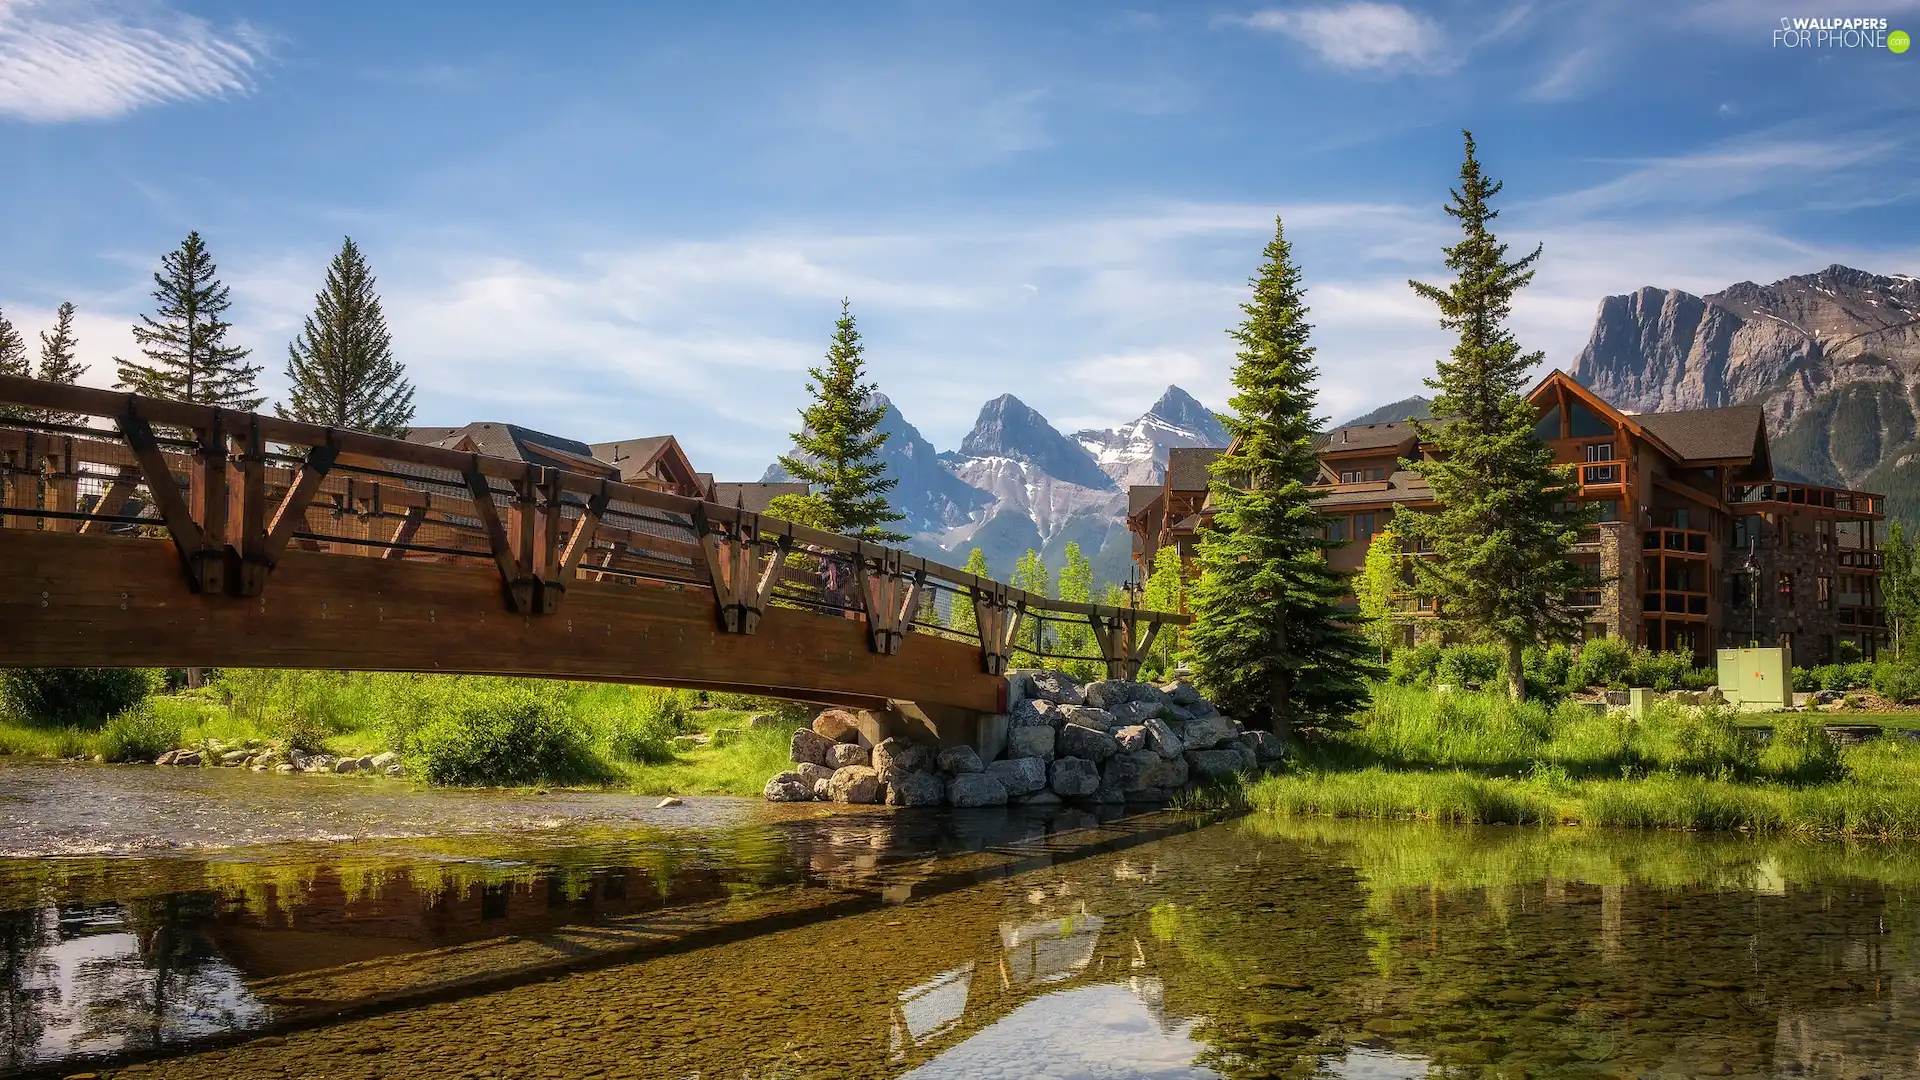 Province of Alberta, Canada, Canmore, rocky mountains, house, bridge, trees, viewes, River